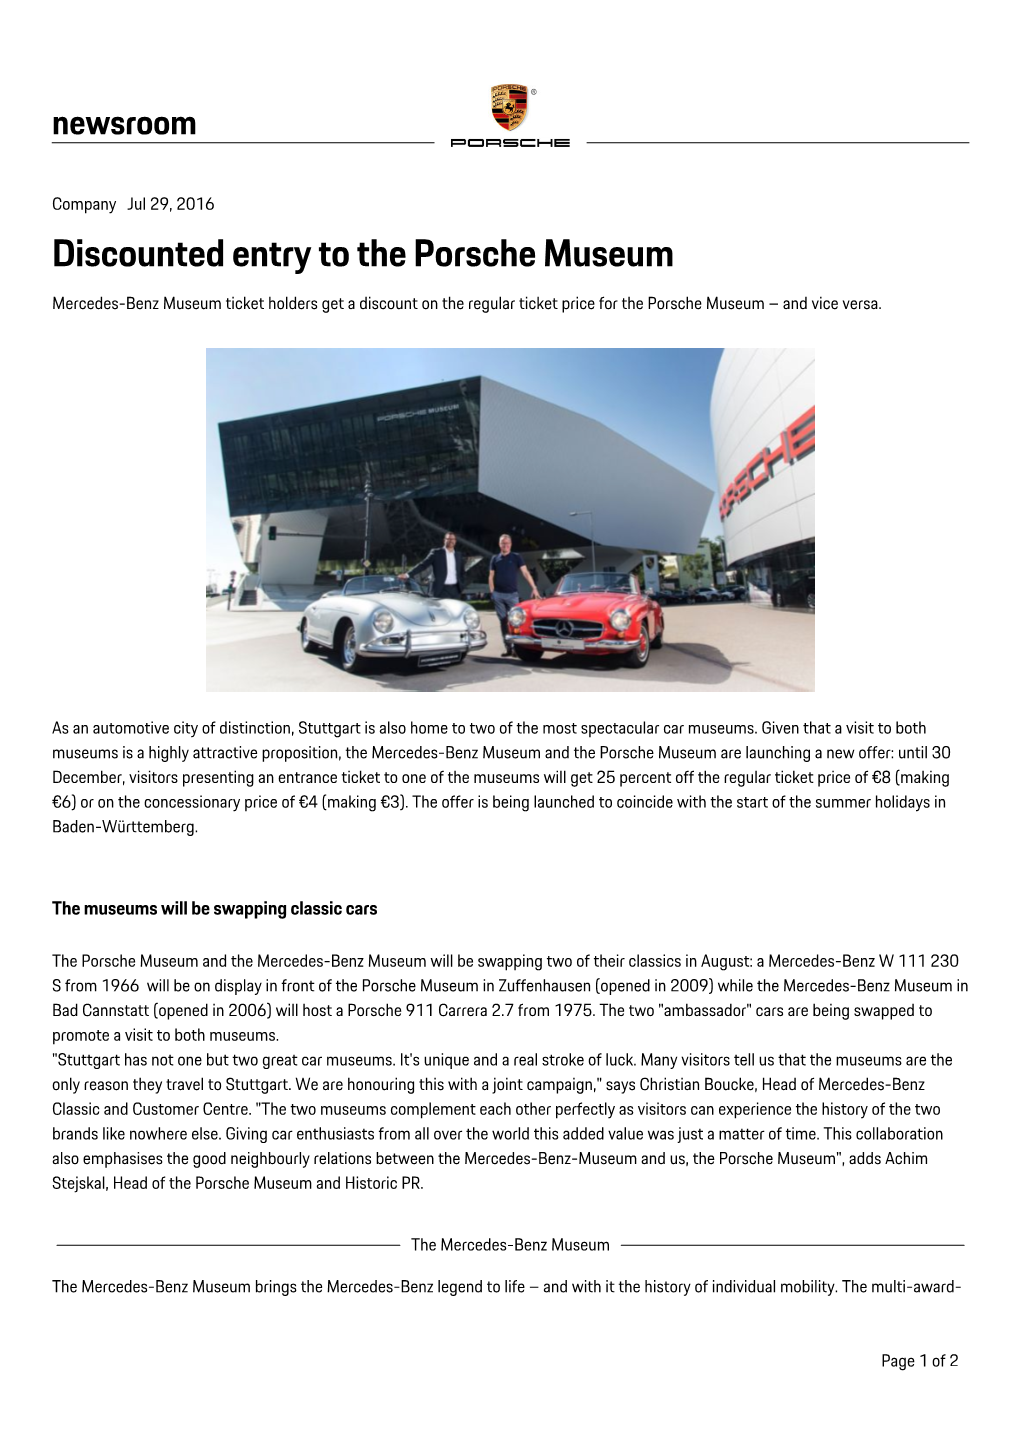 Discounted Entry to the Porsche Museum Mercedes-Benz Museum Ticket Holders Get a Discount on the Regular Ticket Price for the Porsche Museum – and Vice Versa